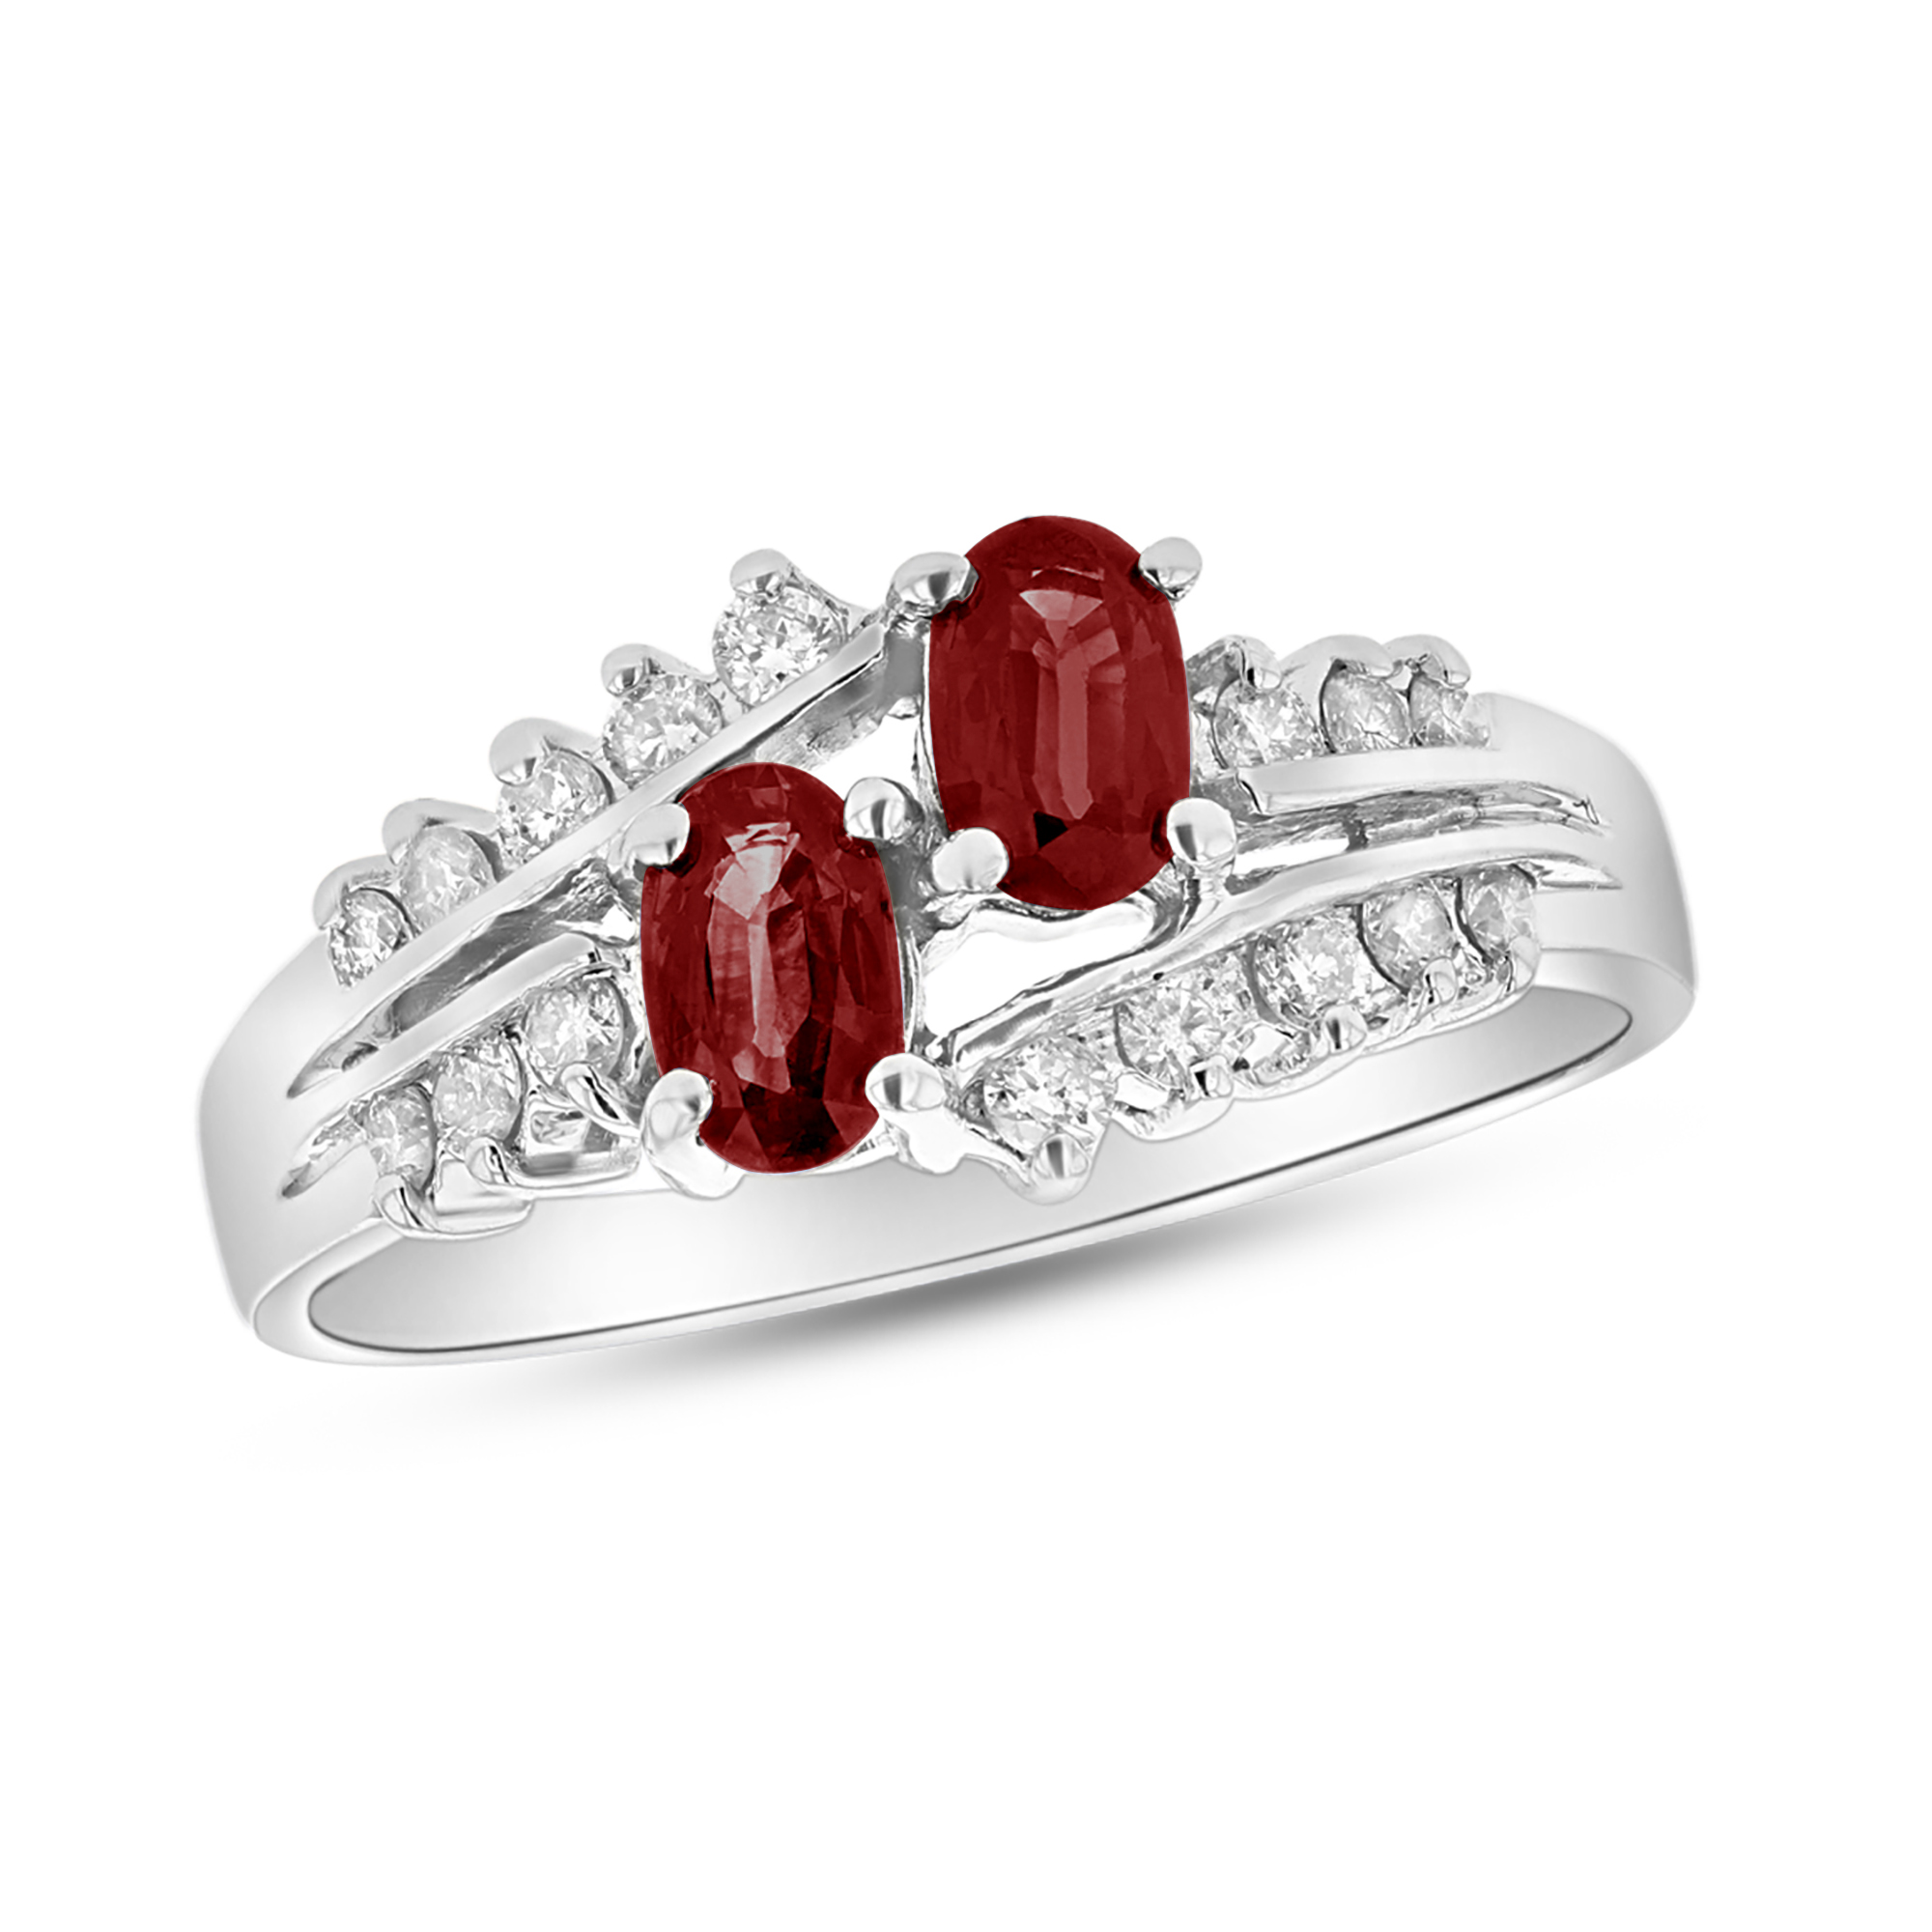 View 0.80ctw Diamond and Ruby Fashion Ring in 14k White Gold